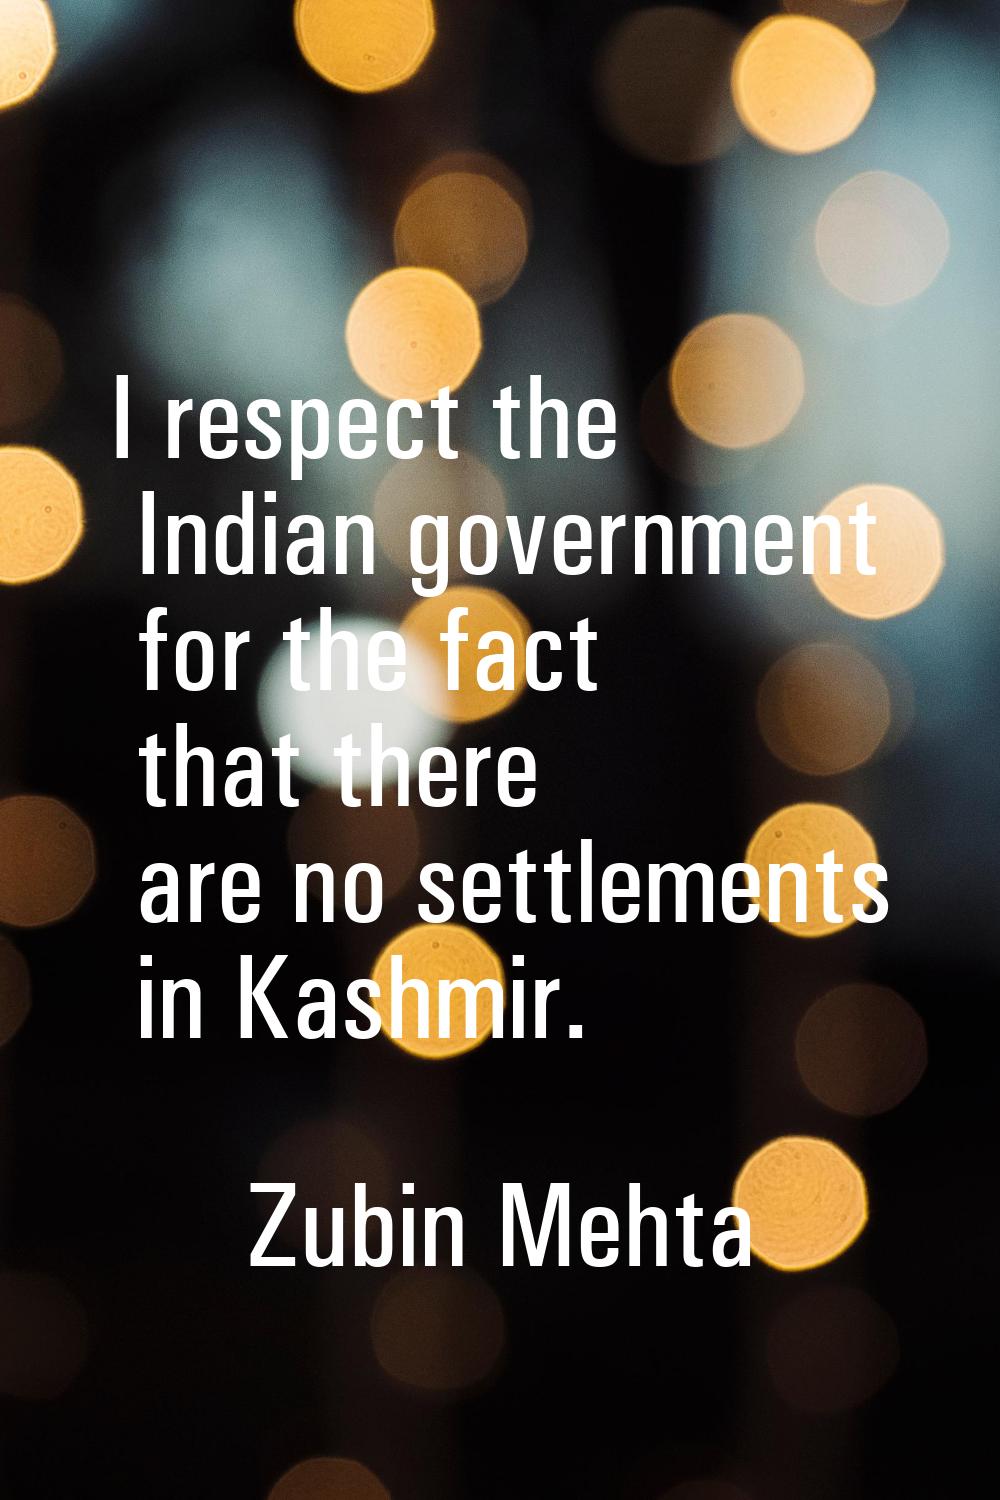 I respect the Indian government for the fact that there are no settlements in Kashmir.